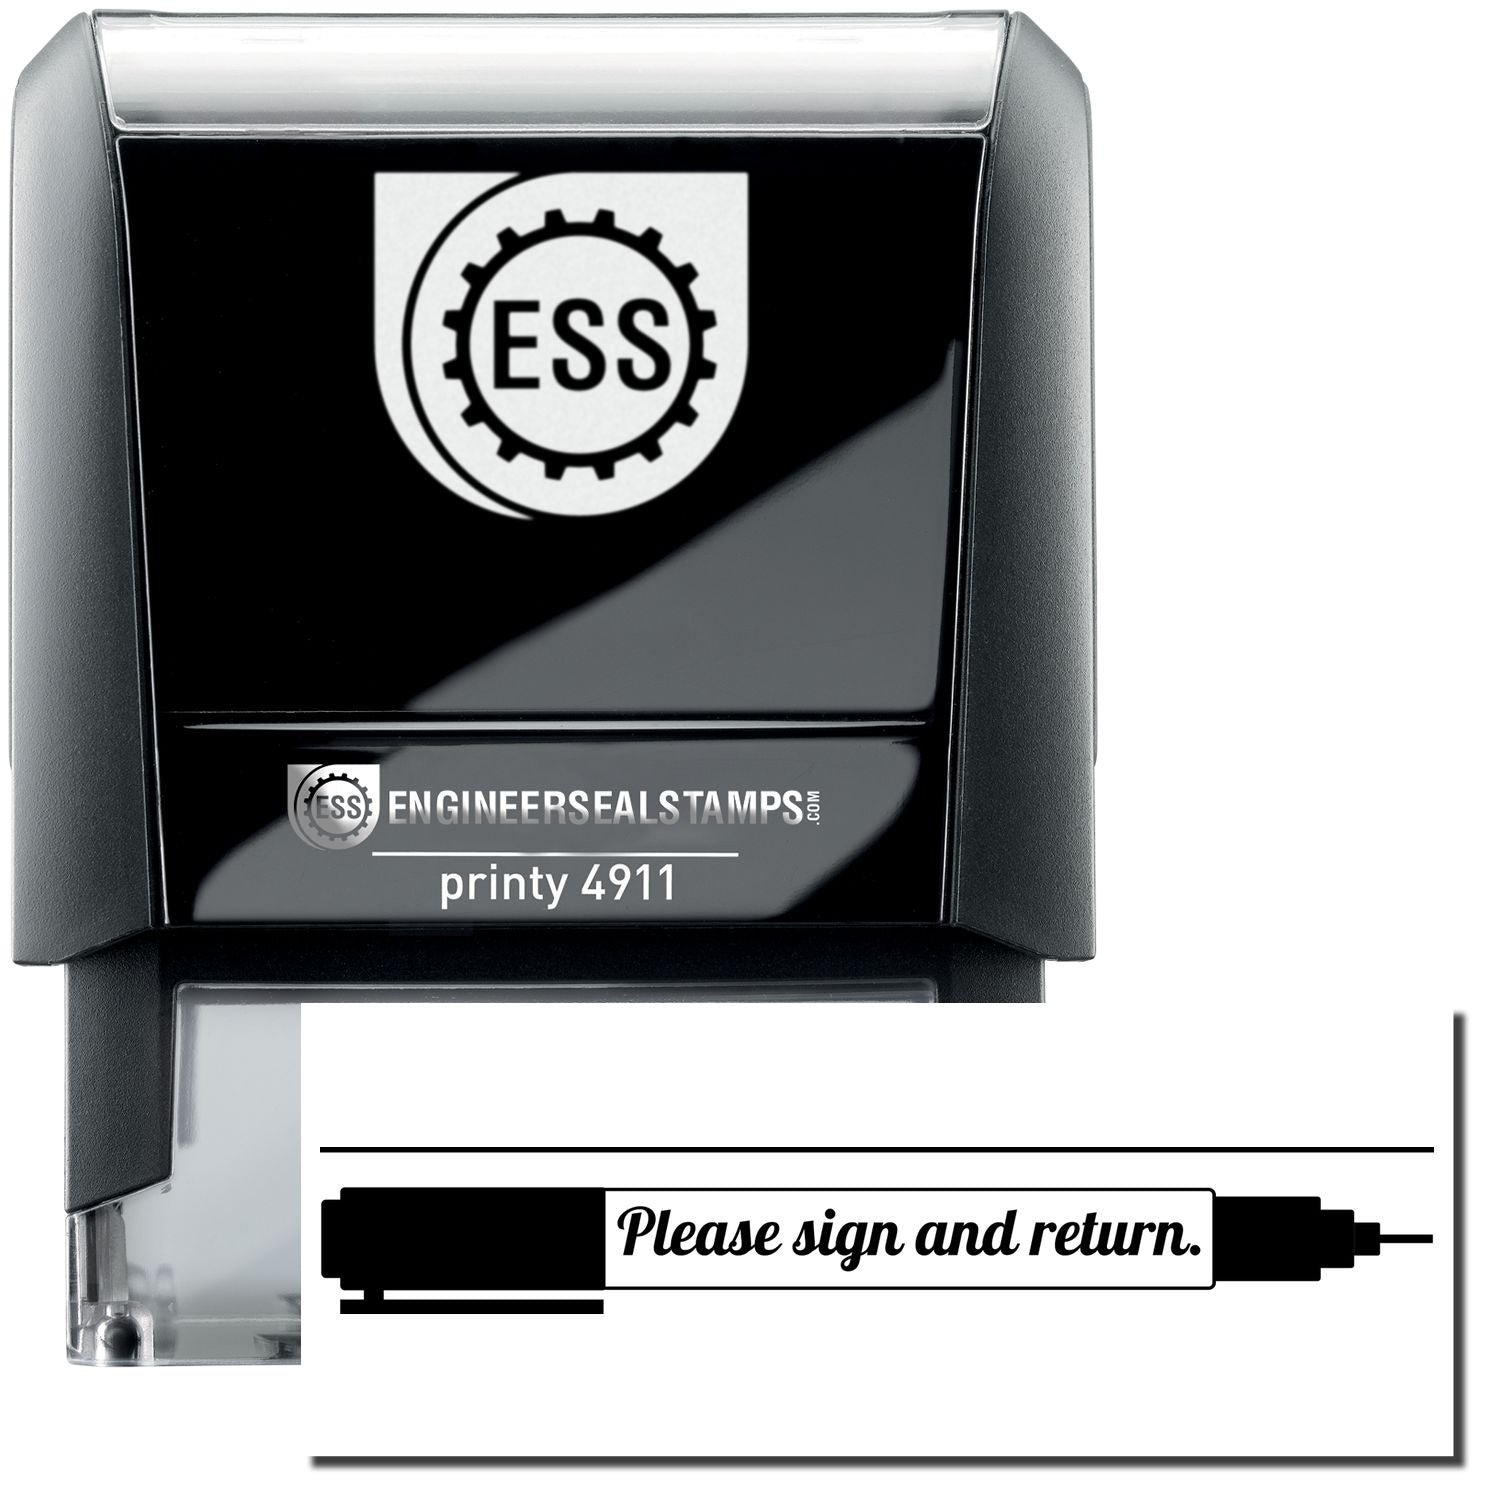 A self-inking stamp with a stamped image showing how the text "Please sign and return." (with an image of a pen and a line on the top of the text) is displayed after stamping.